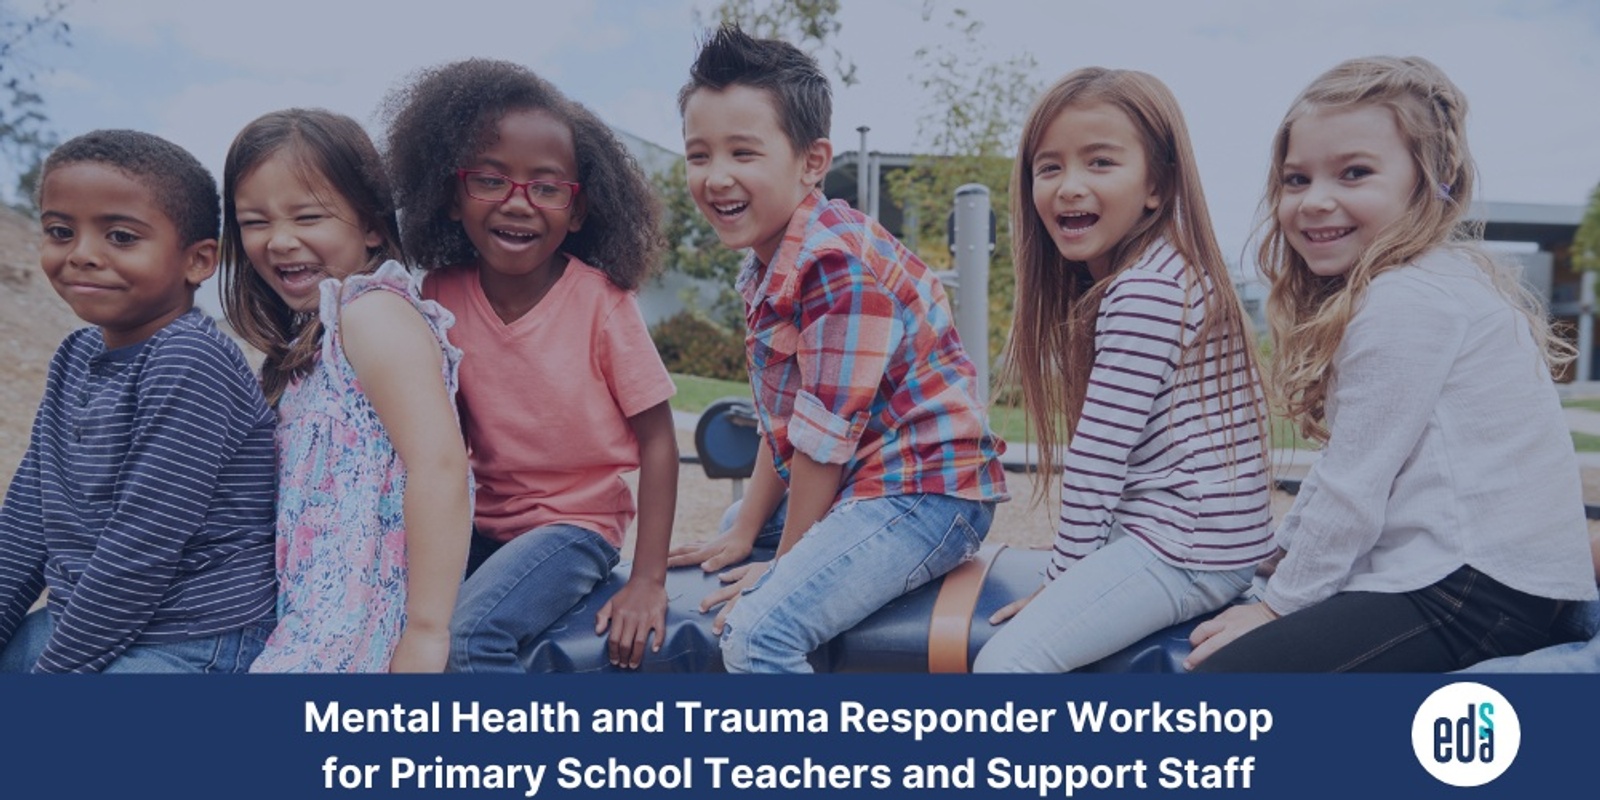 Mental Health and Trauma Responder Workshop for Primary School Teachers and Support Staff - ONLINE